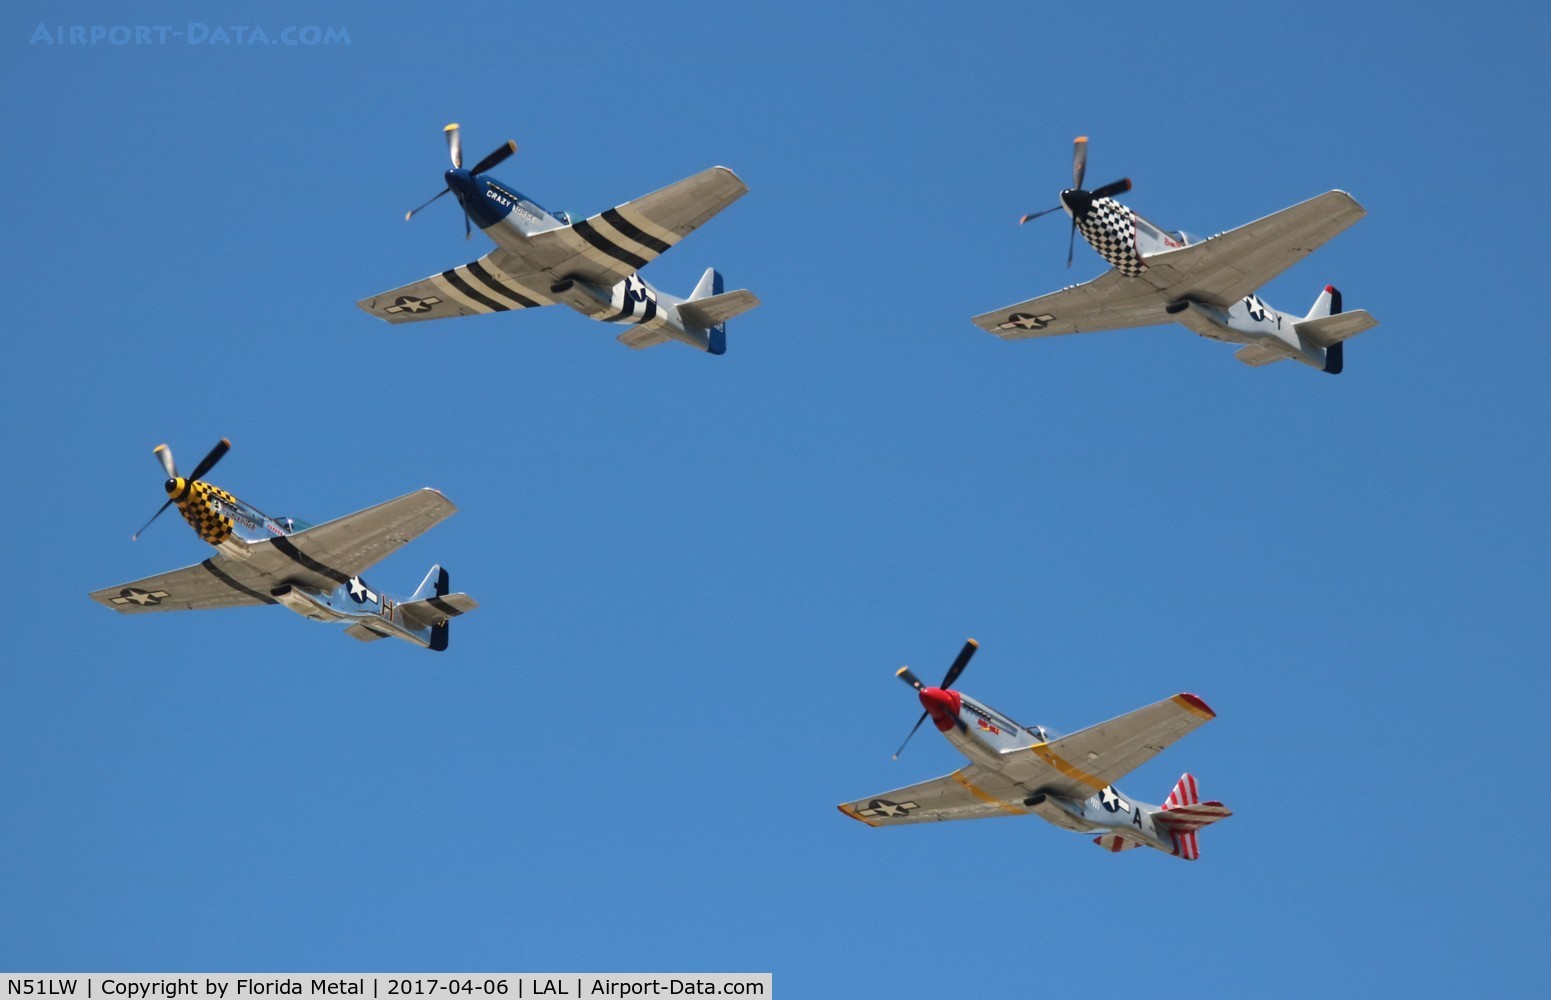 N51LW, 1962 North American P-51D Mustang C/N 122-41037, Little With with 3 others